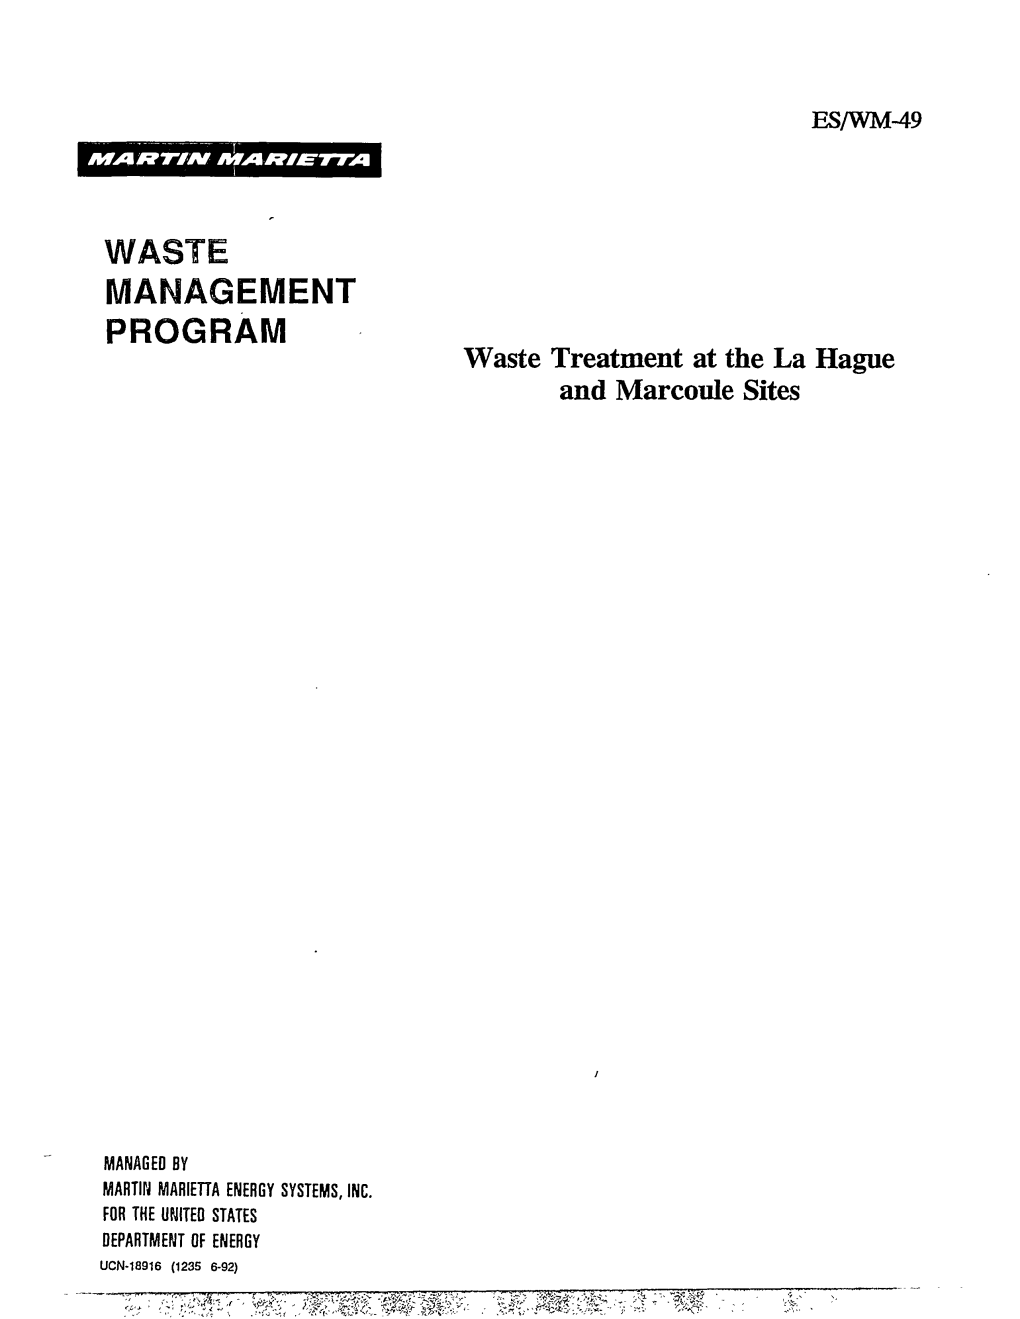 Waste Treatment at the La Hague and Marcoule Sites